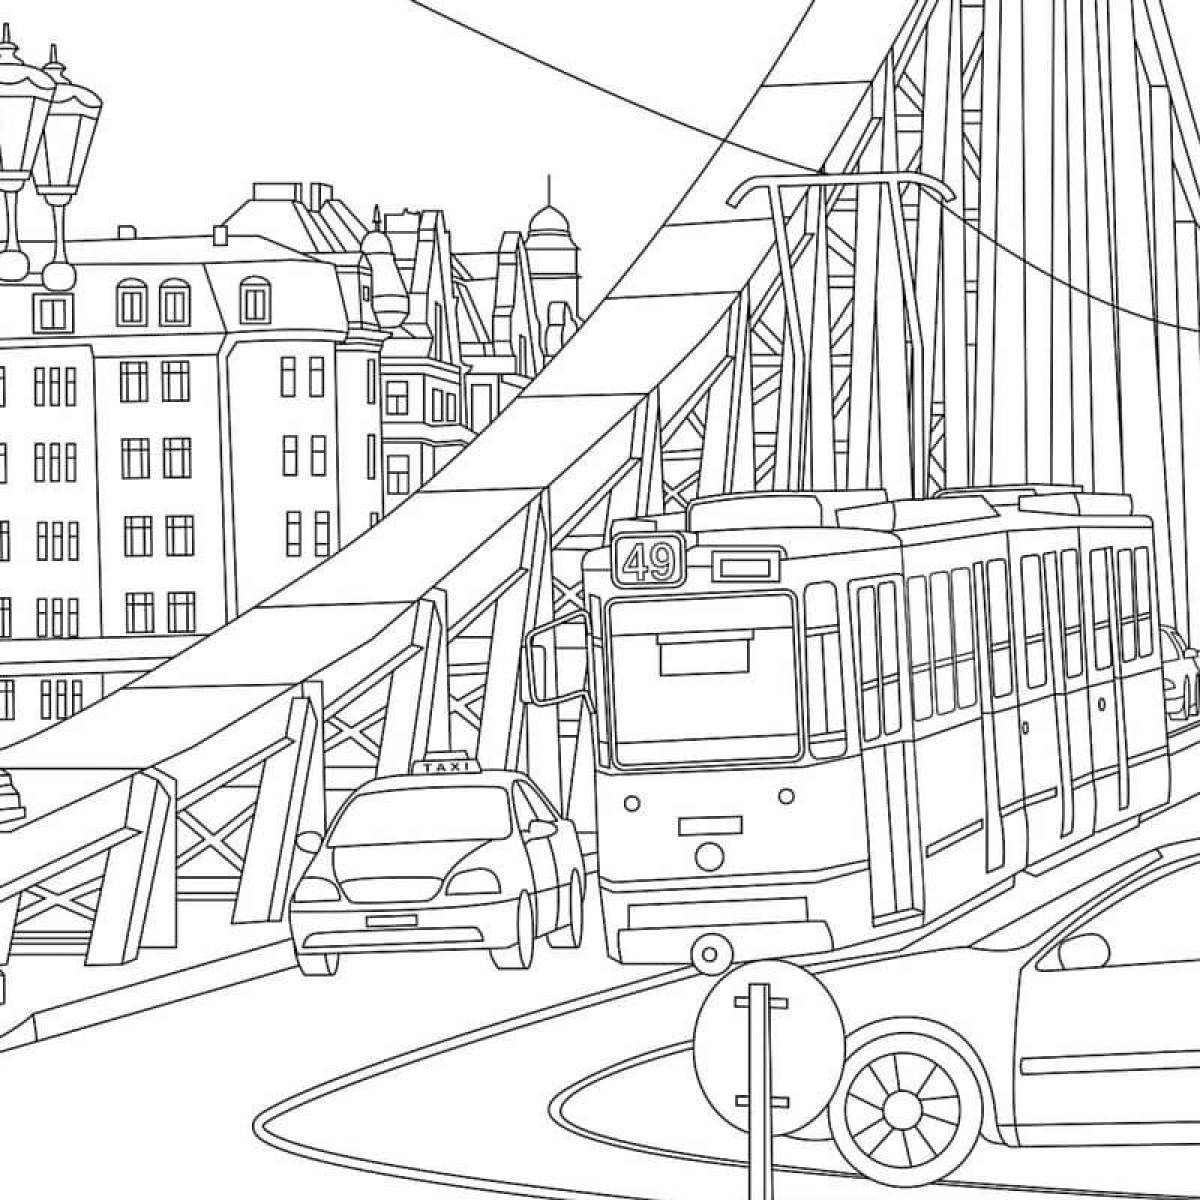 Attractive city coloring book for kids